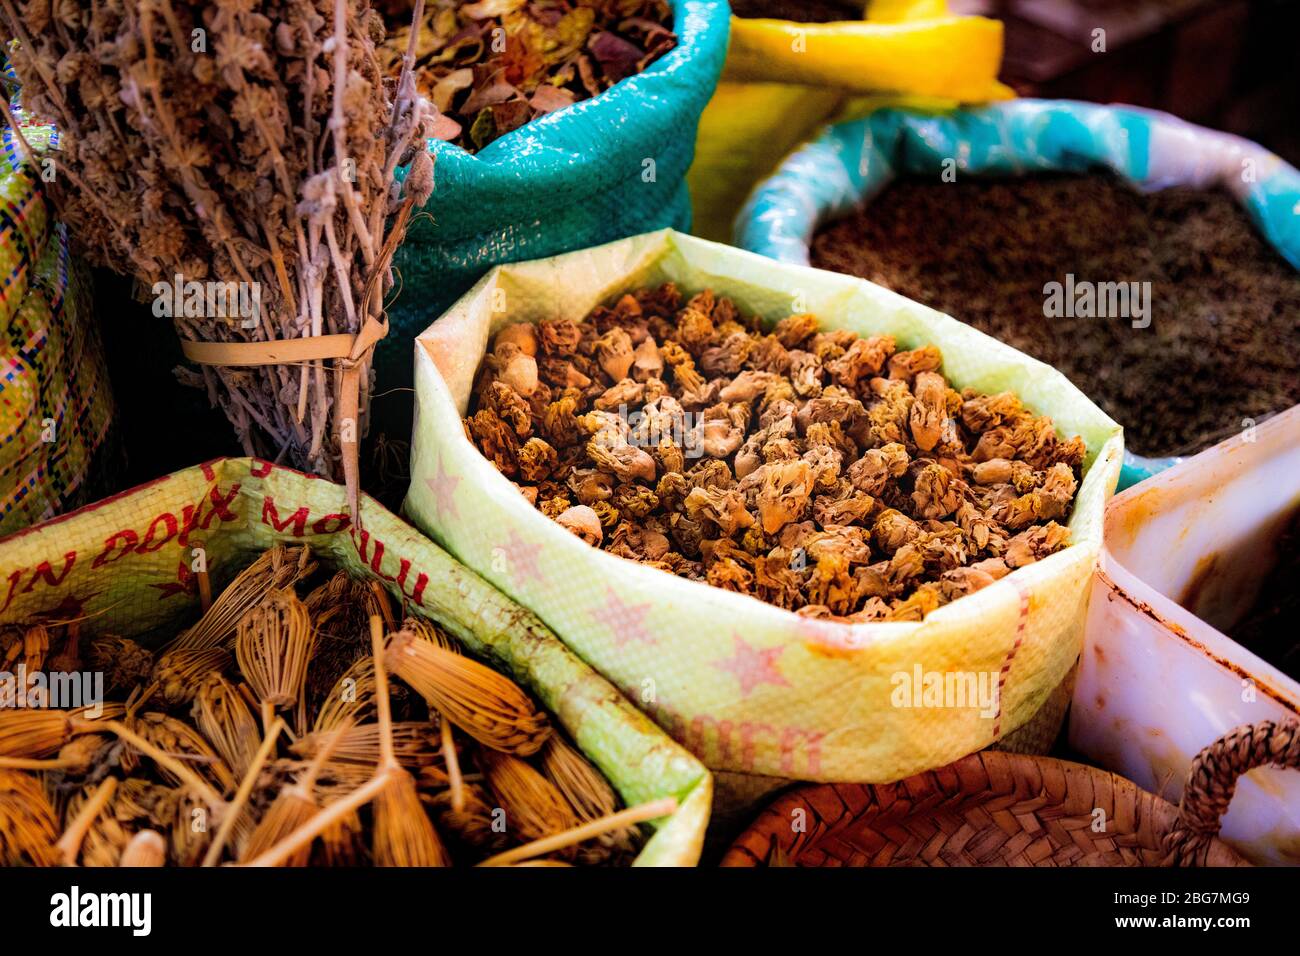 Spices in a market in Tanger, Morroco Stock Photo